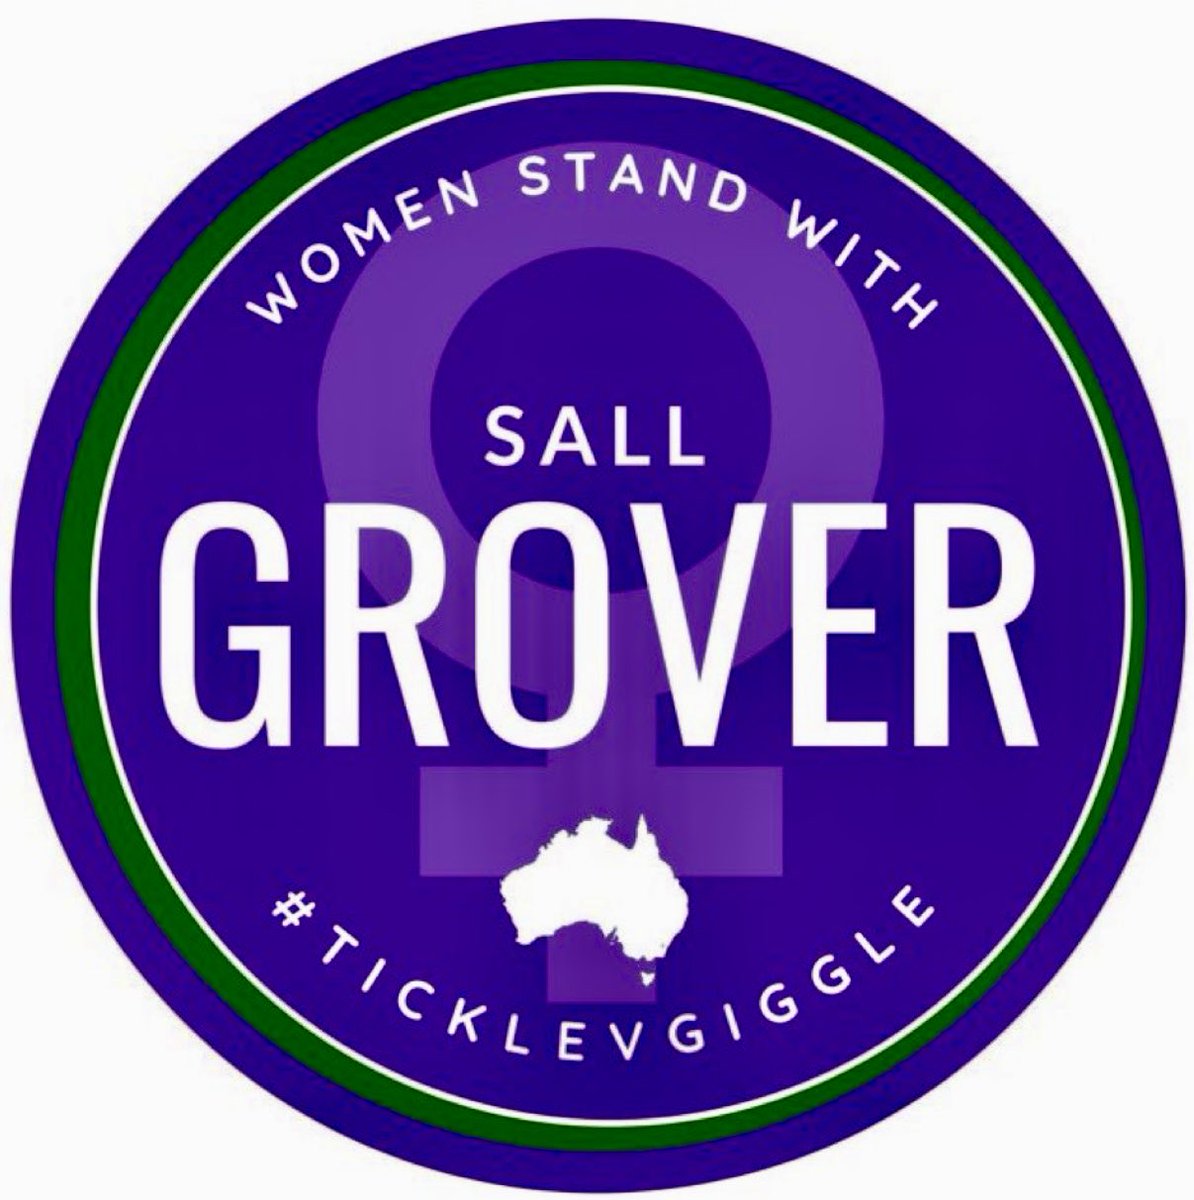 Day 3 of Tickle v Giggle today in the Federal Court of Australia 🇦🇺Good luck to Sall and her team and many thanks for standing up for women’s rights. #IStandWithSallGrover #WomensRightsAreHumanRights